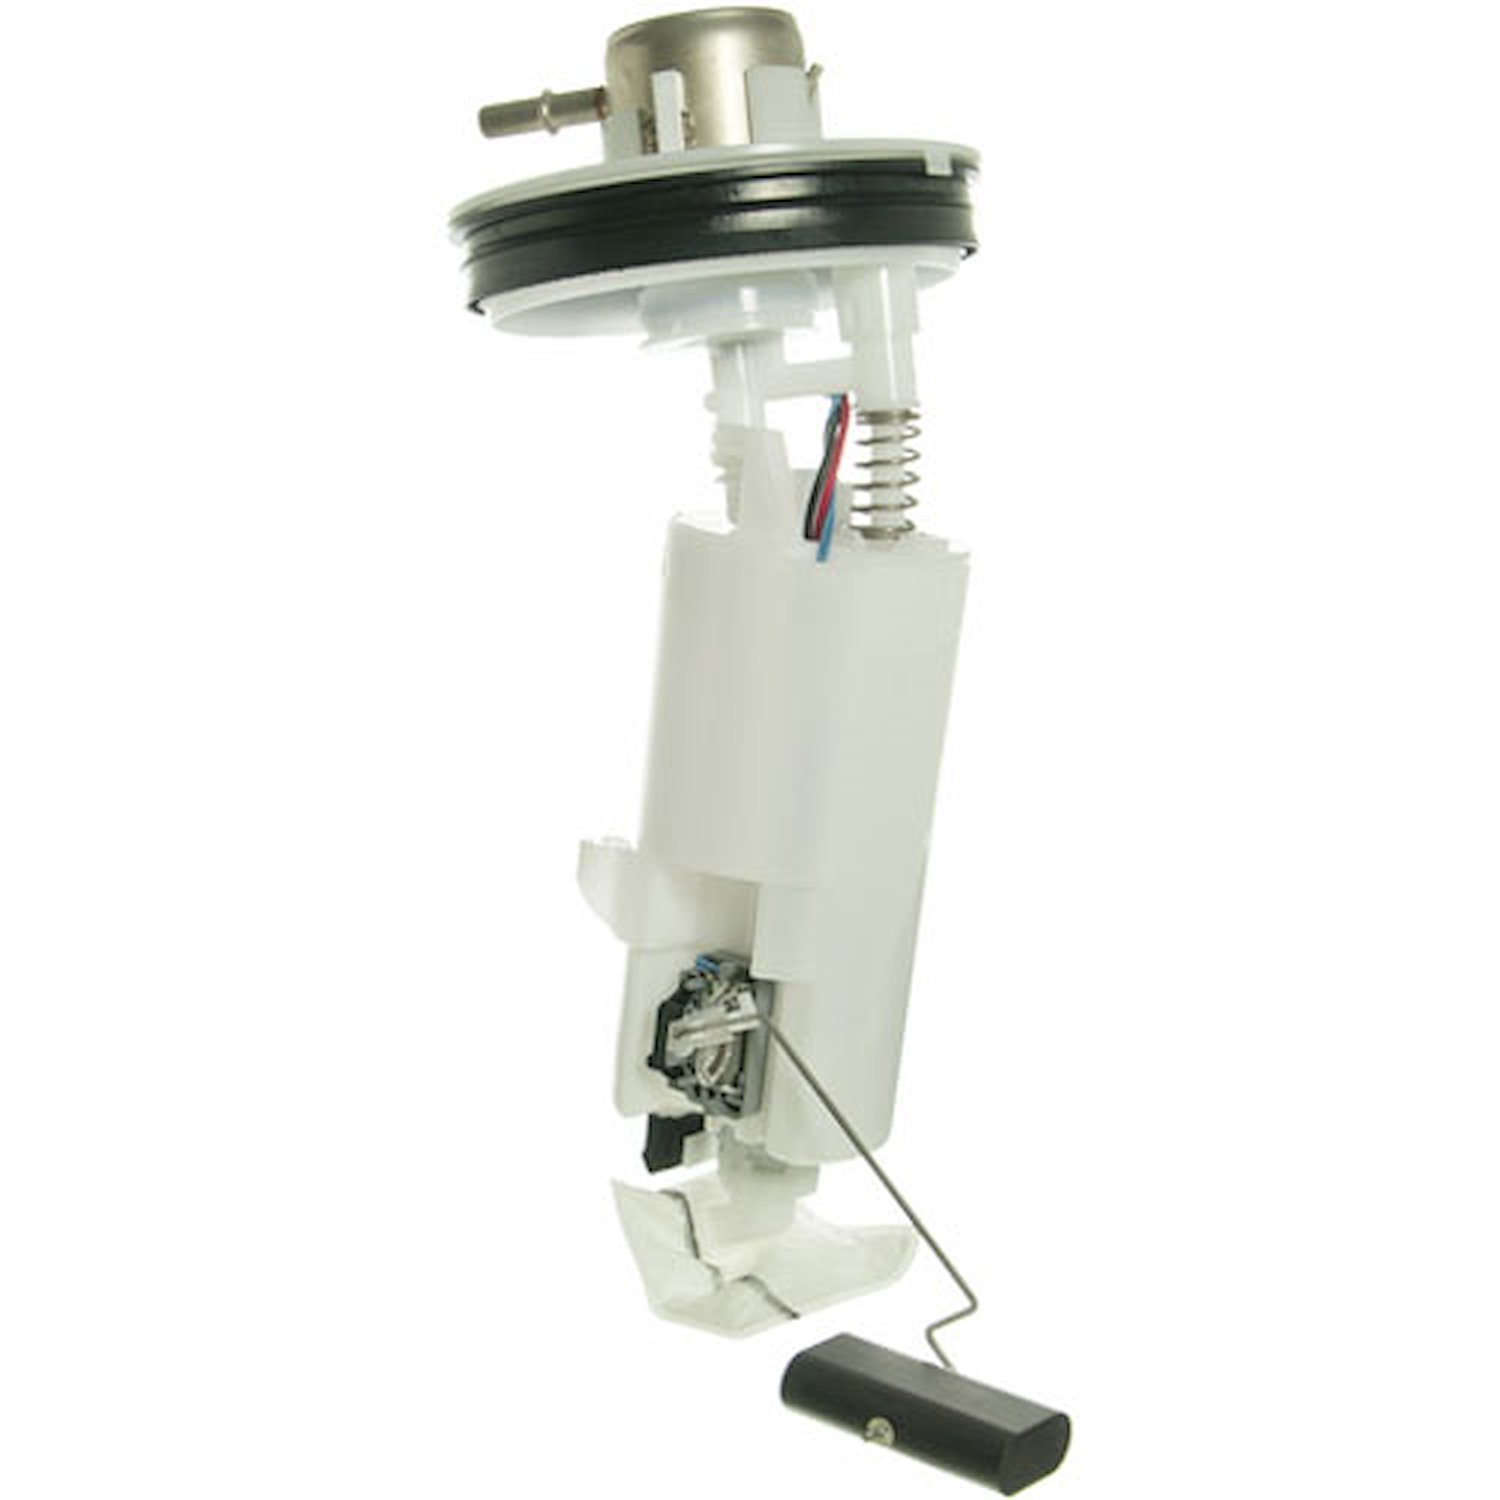 OE Chrysler/Dodge Replacement Electric Fuel Pump Module Assembly 2001-05 Dodge Neon 2.0L 4 Cyl